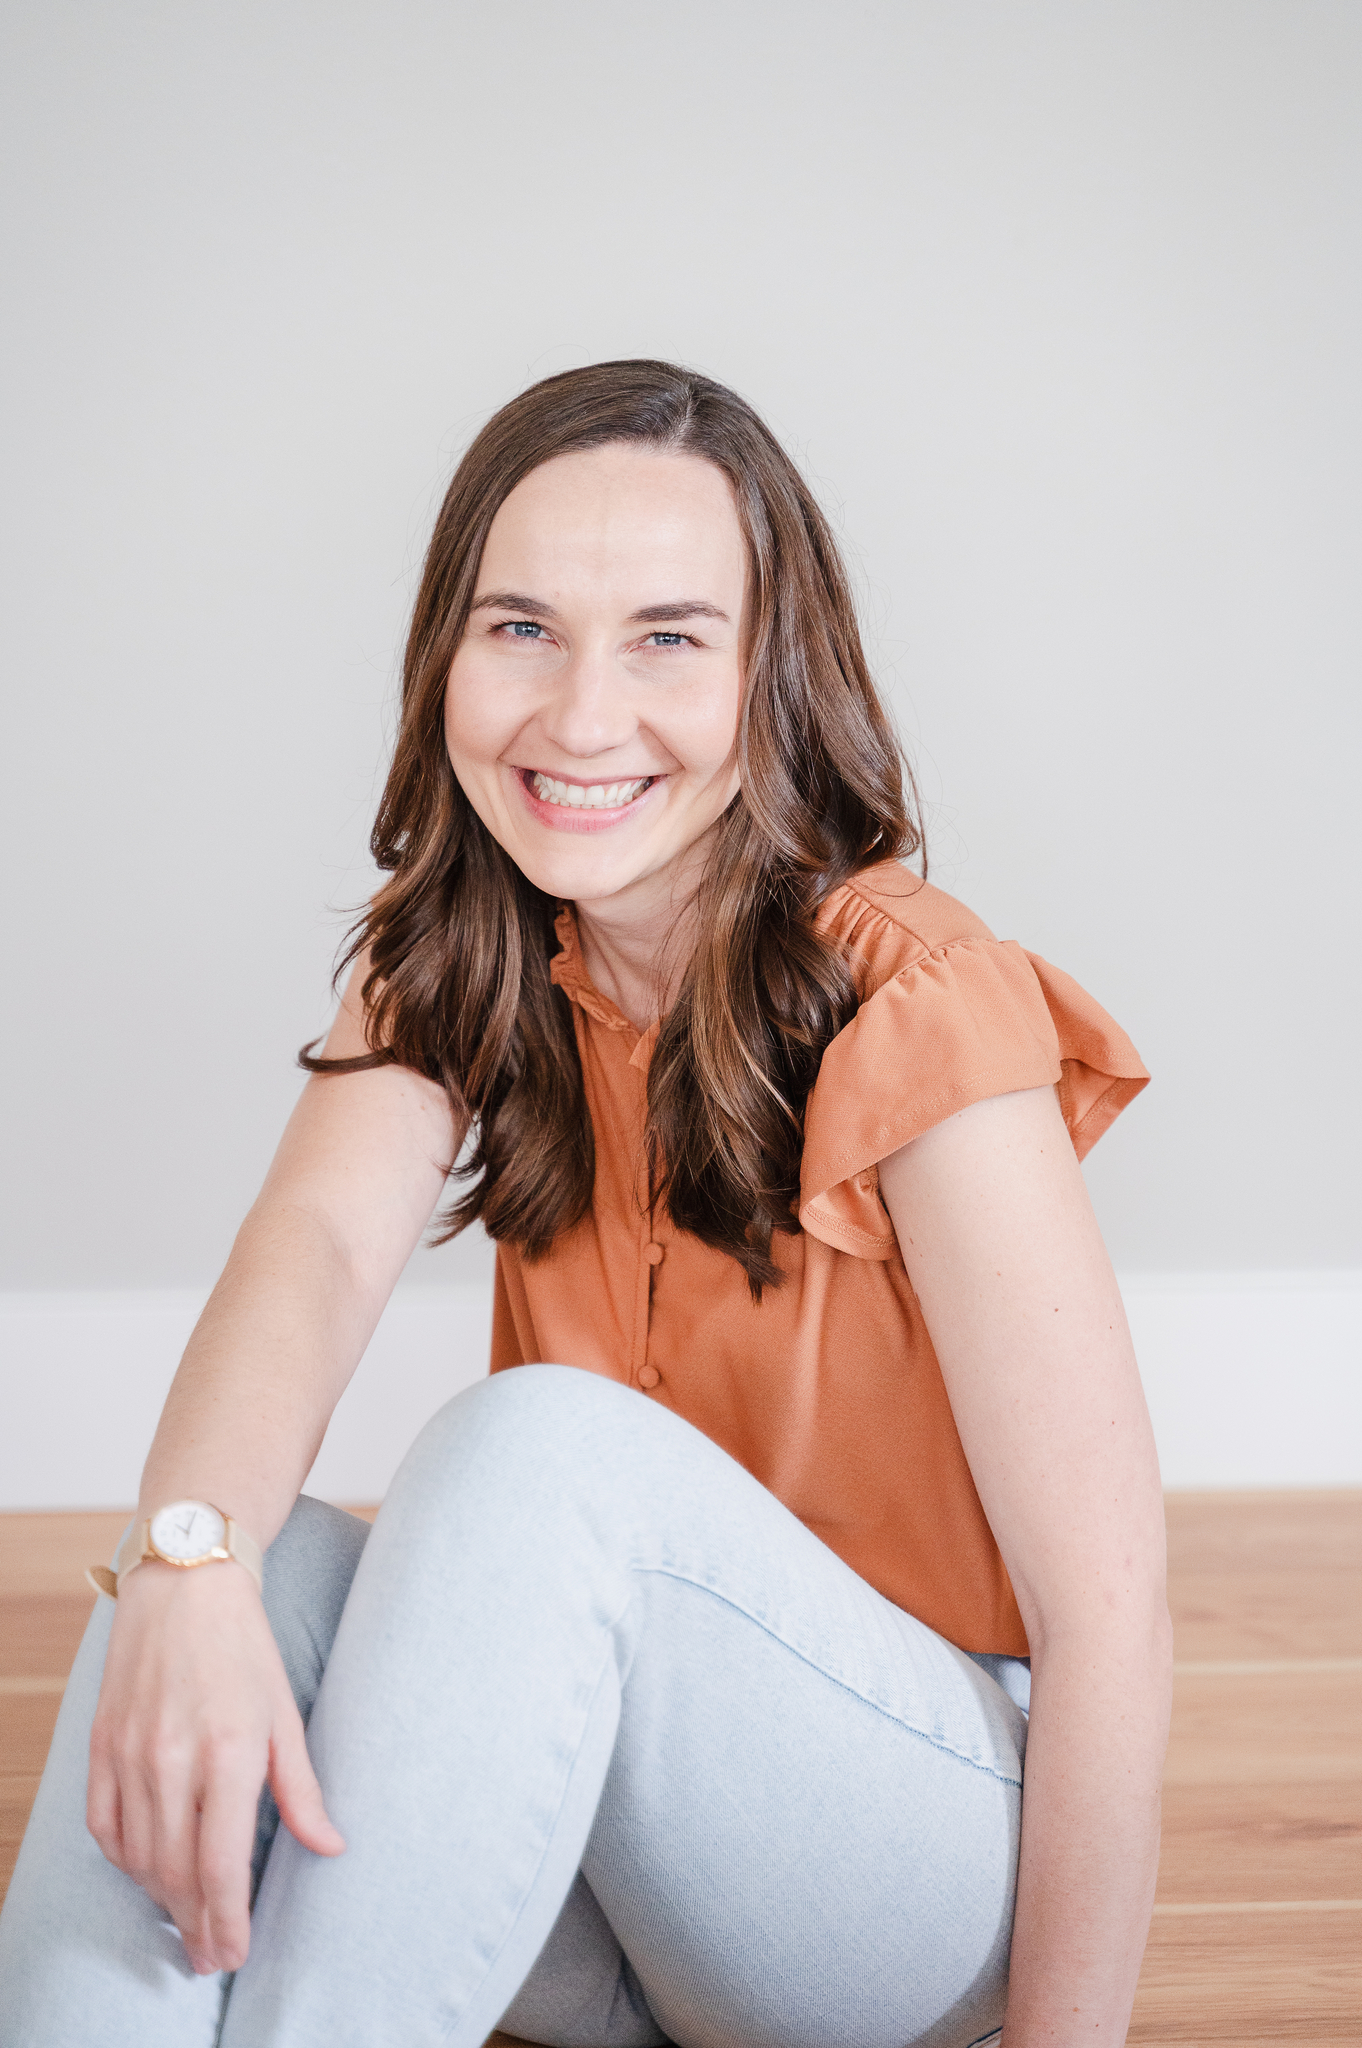 Why Simple Businesses Win | The Business Minimalist™ Podcast with Jade Boyd